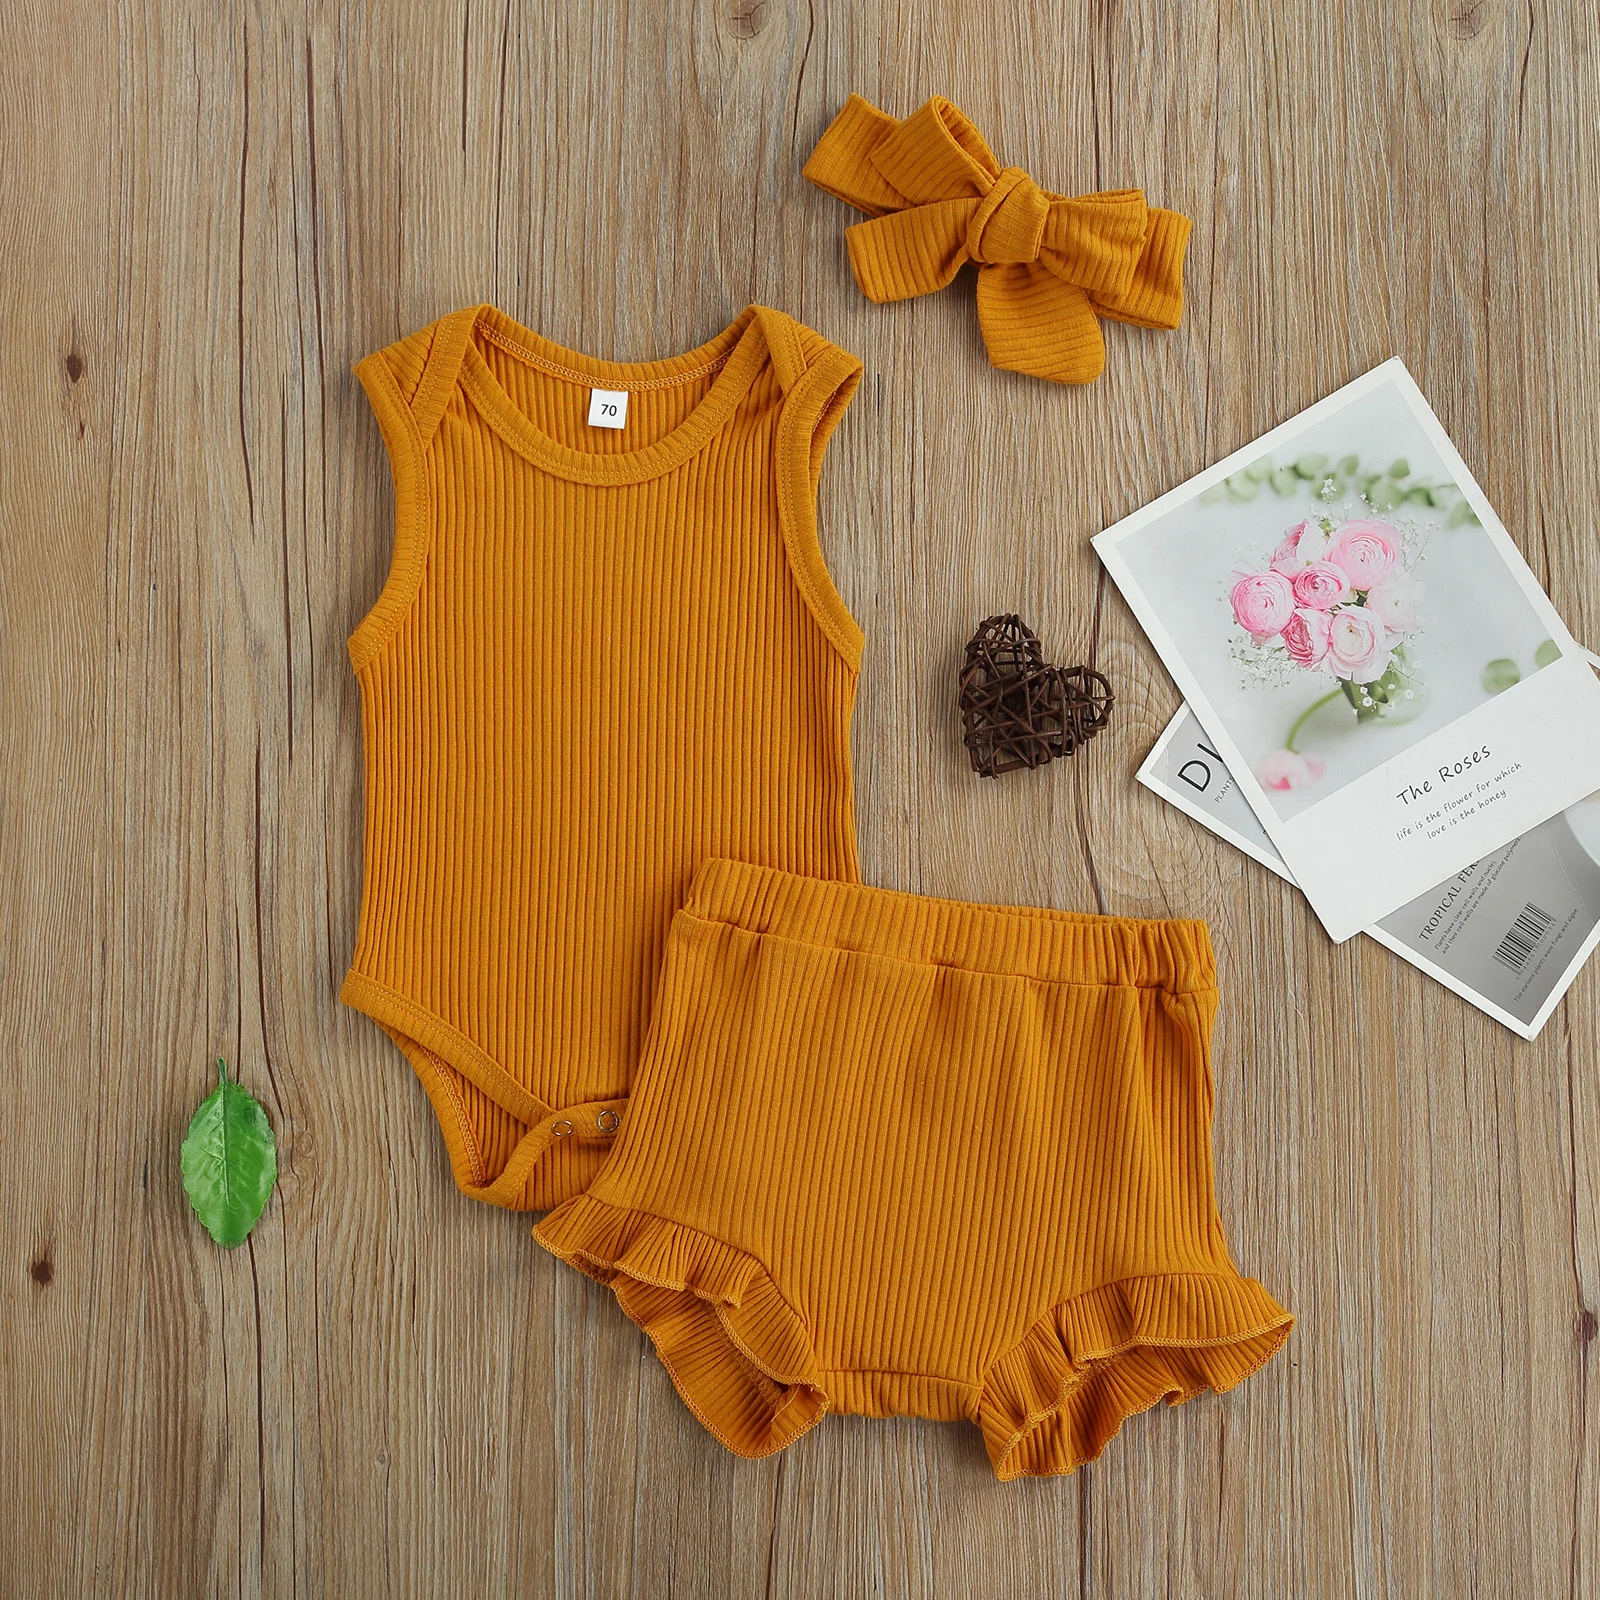 Summer 2021 Kids Baby Girls Clothes Set Cotton Ribbed Solid Color Sleeveless Romper+Shorts+Headband for Toddler Infant Costumes Baby Clothing Set luxury